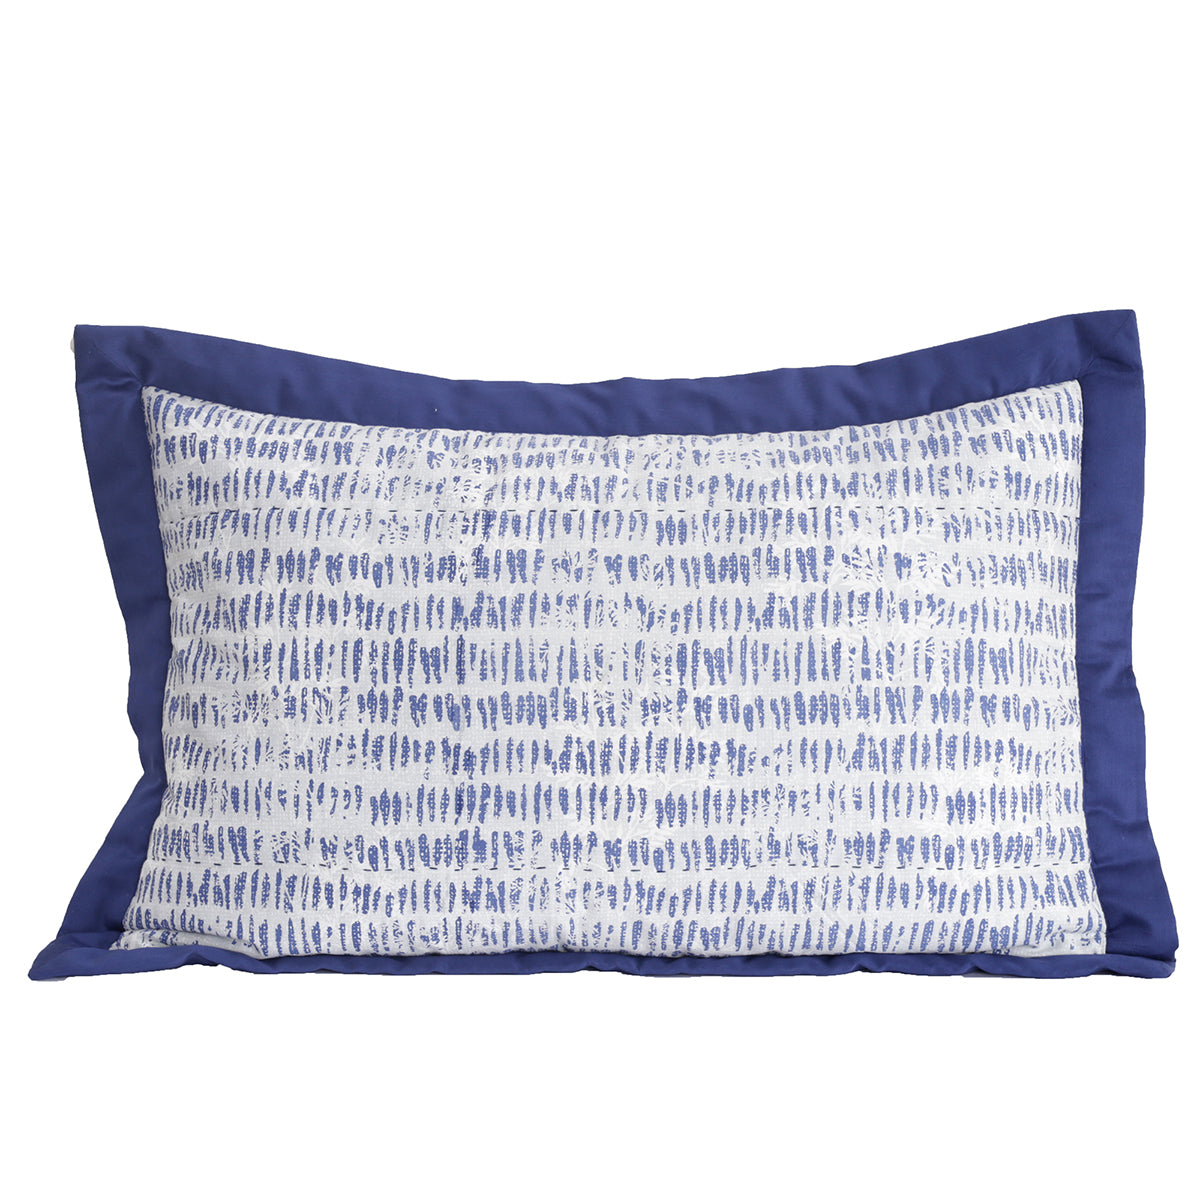 Traversed Line Hand Quilted 2PC Pillow Sham Set